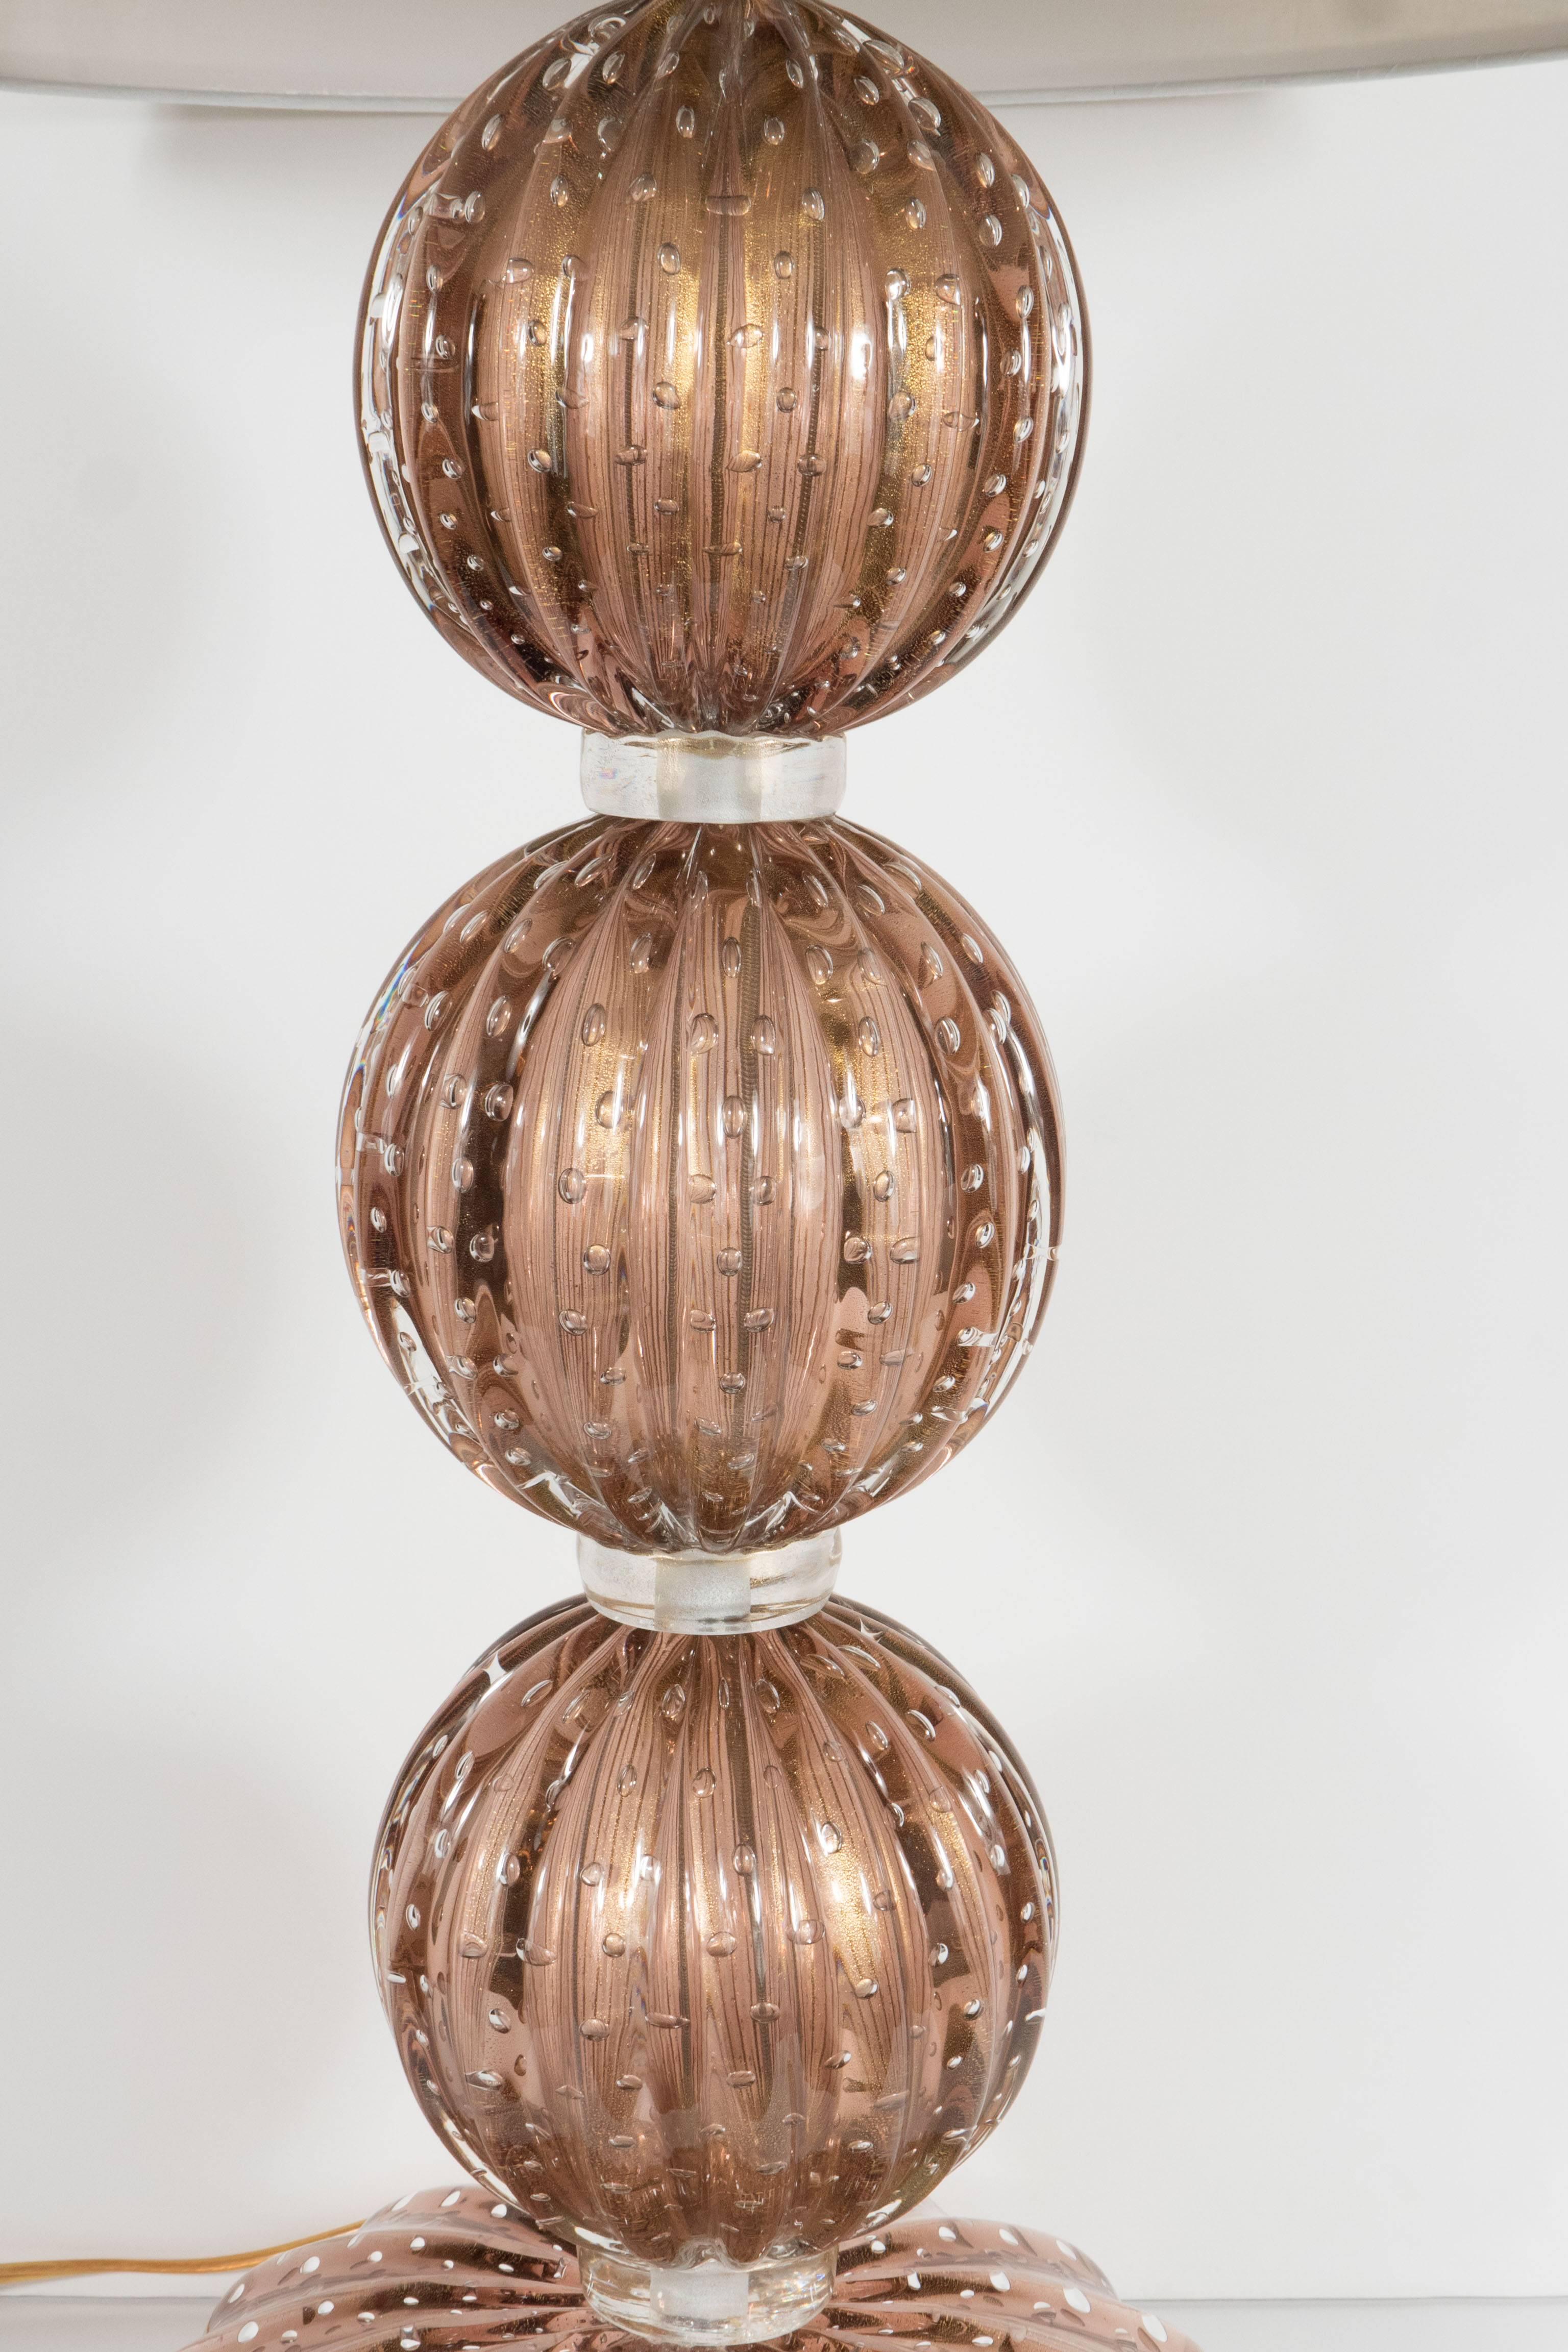 This exquisite pair of Mid-Century Modernist Murano glass table lamps feature a stacked sphere design in a smoked amethyst color separated by a clear band. The glass features a fluted detail with 24-karat gold flecks and controlled release bubbles